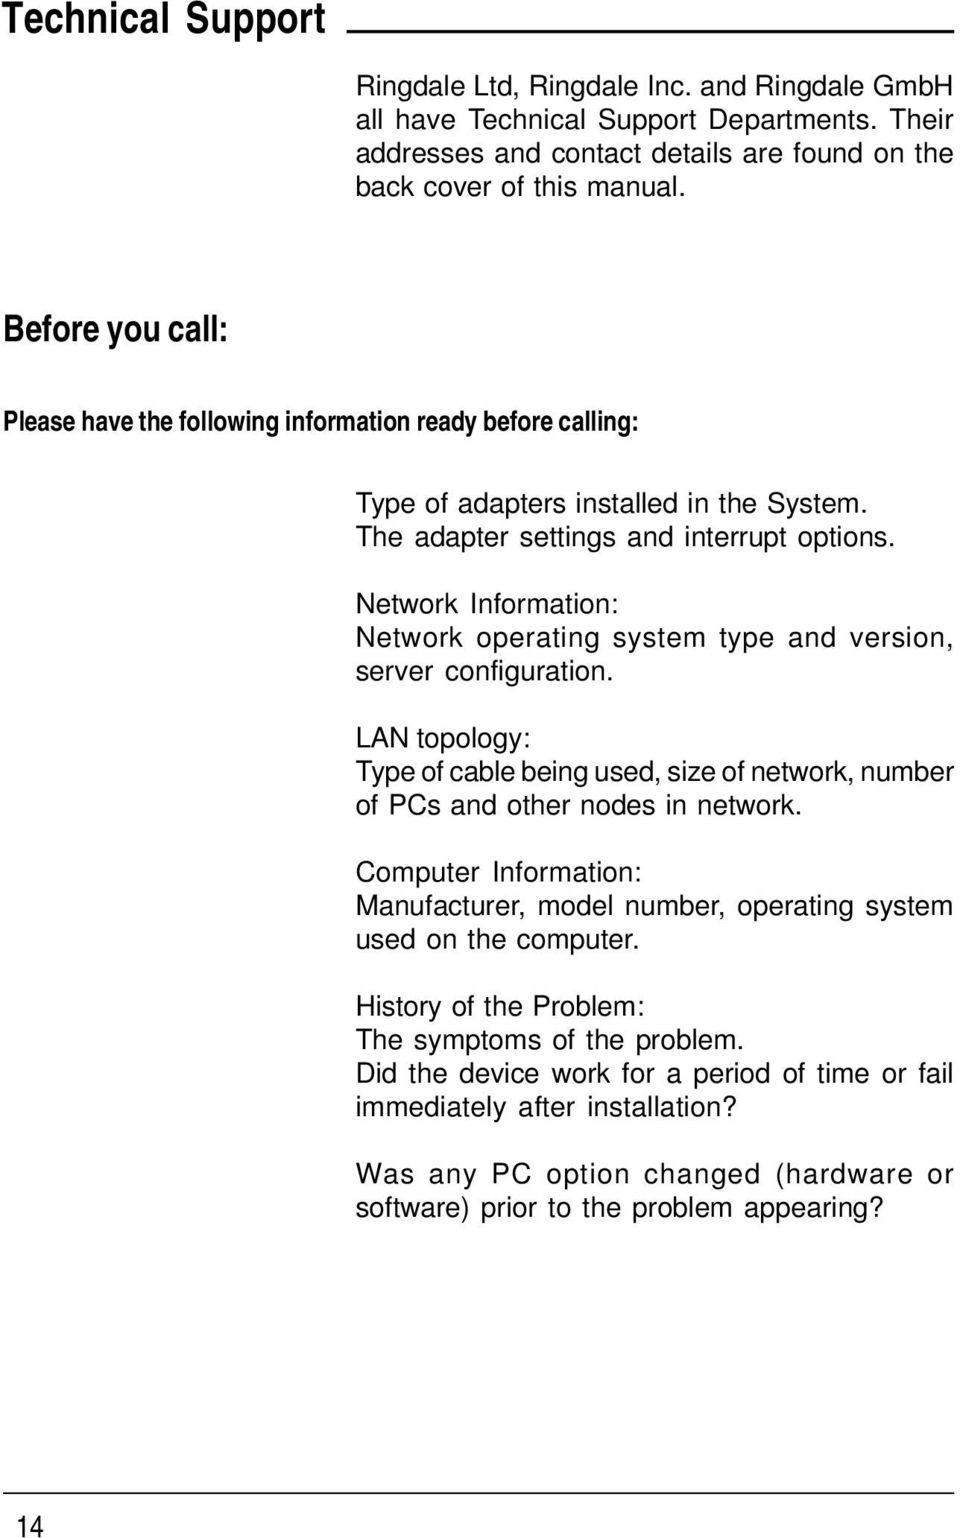 Network Information: Network operating system type and version, server configuration. LAN topology: Type of cable being used, size of network, number of PCs and other nodes in network.